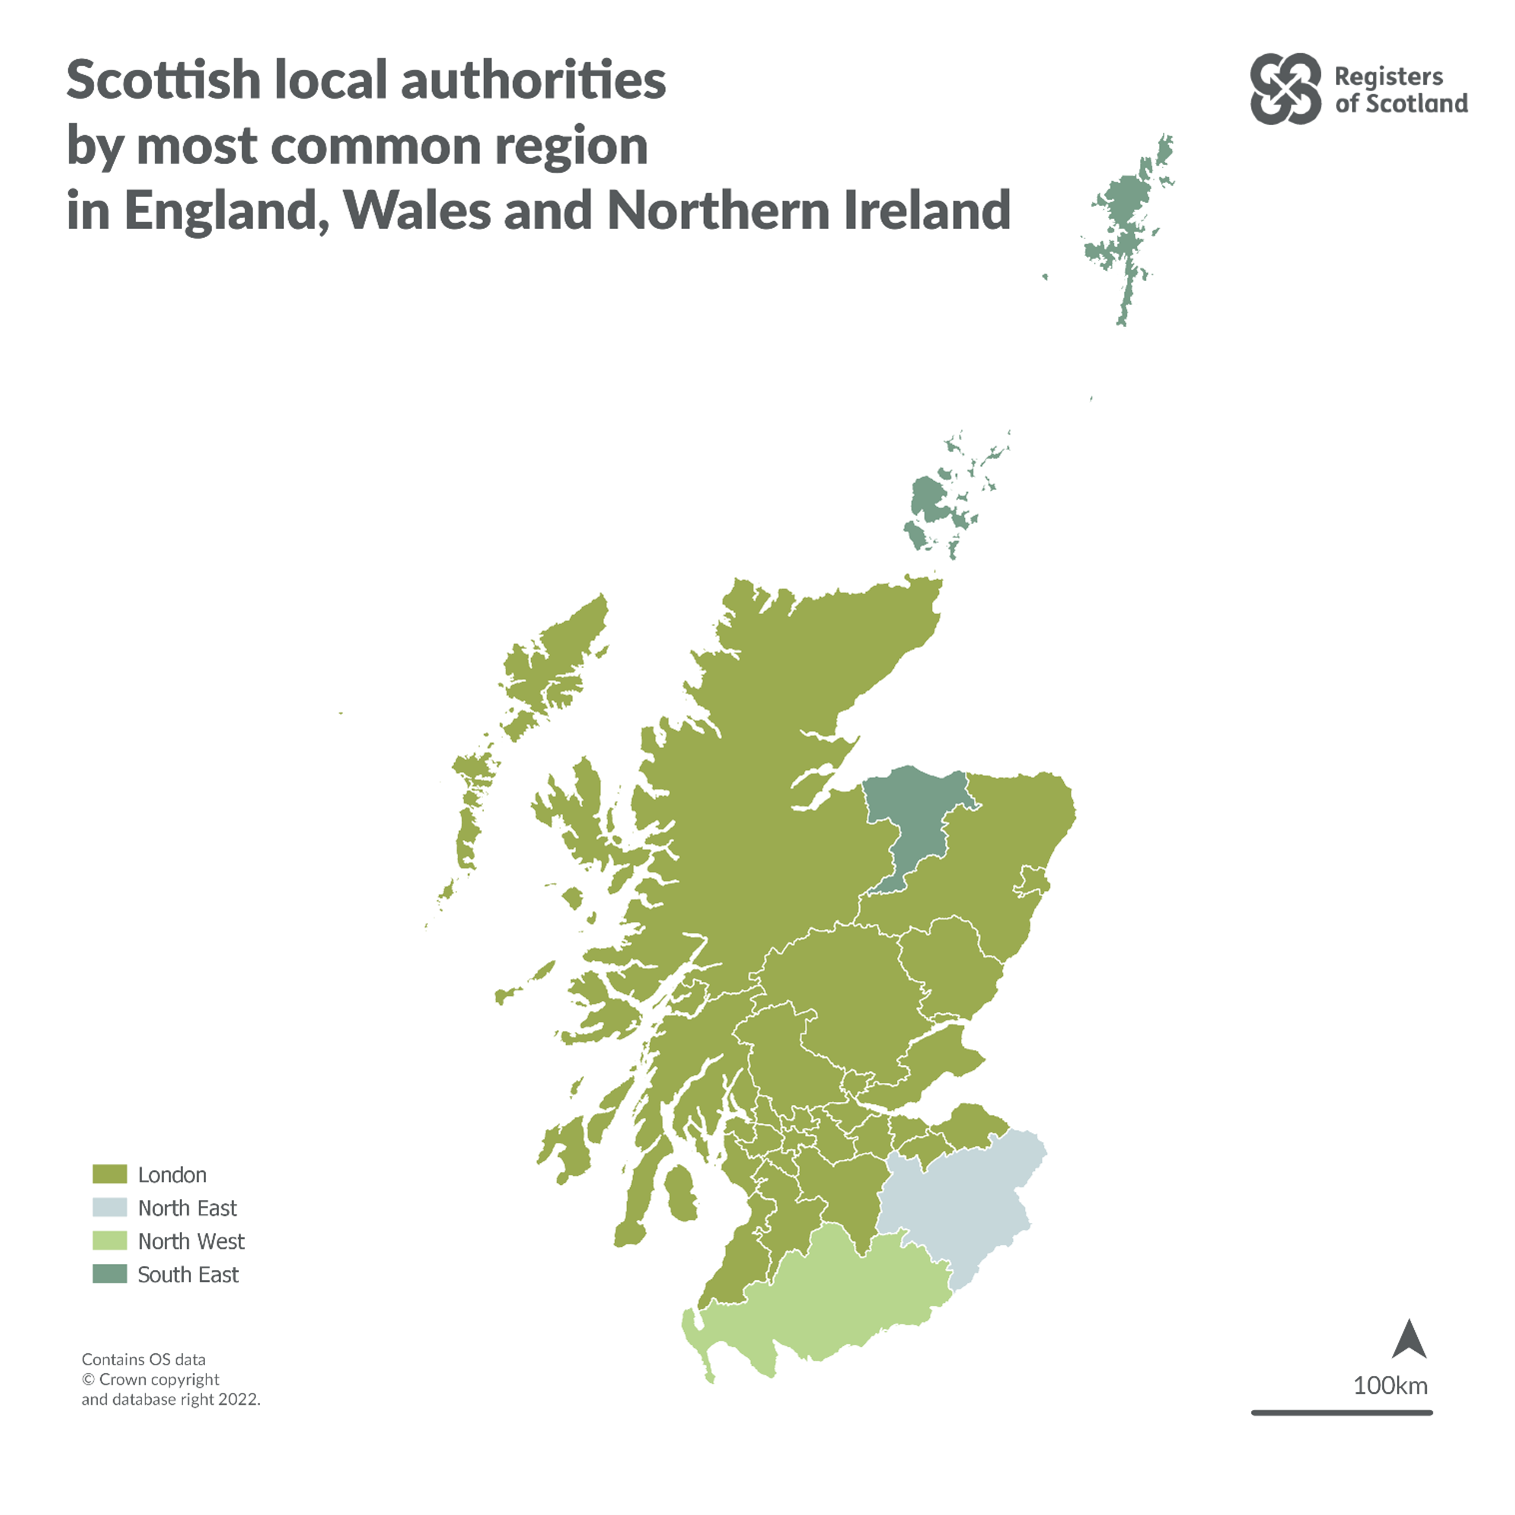 A map of Scotland that shows the Scottish local authorities by the most common region in England, Wales and Northern Ireland